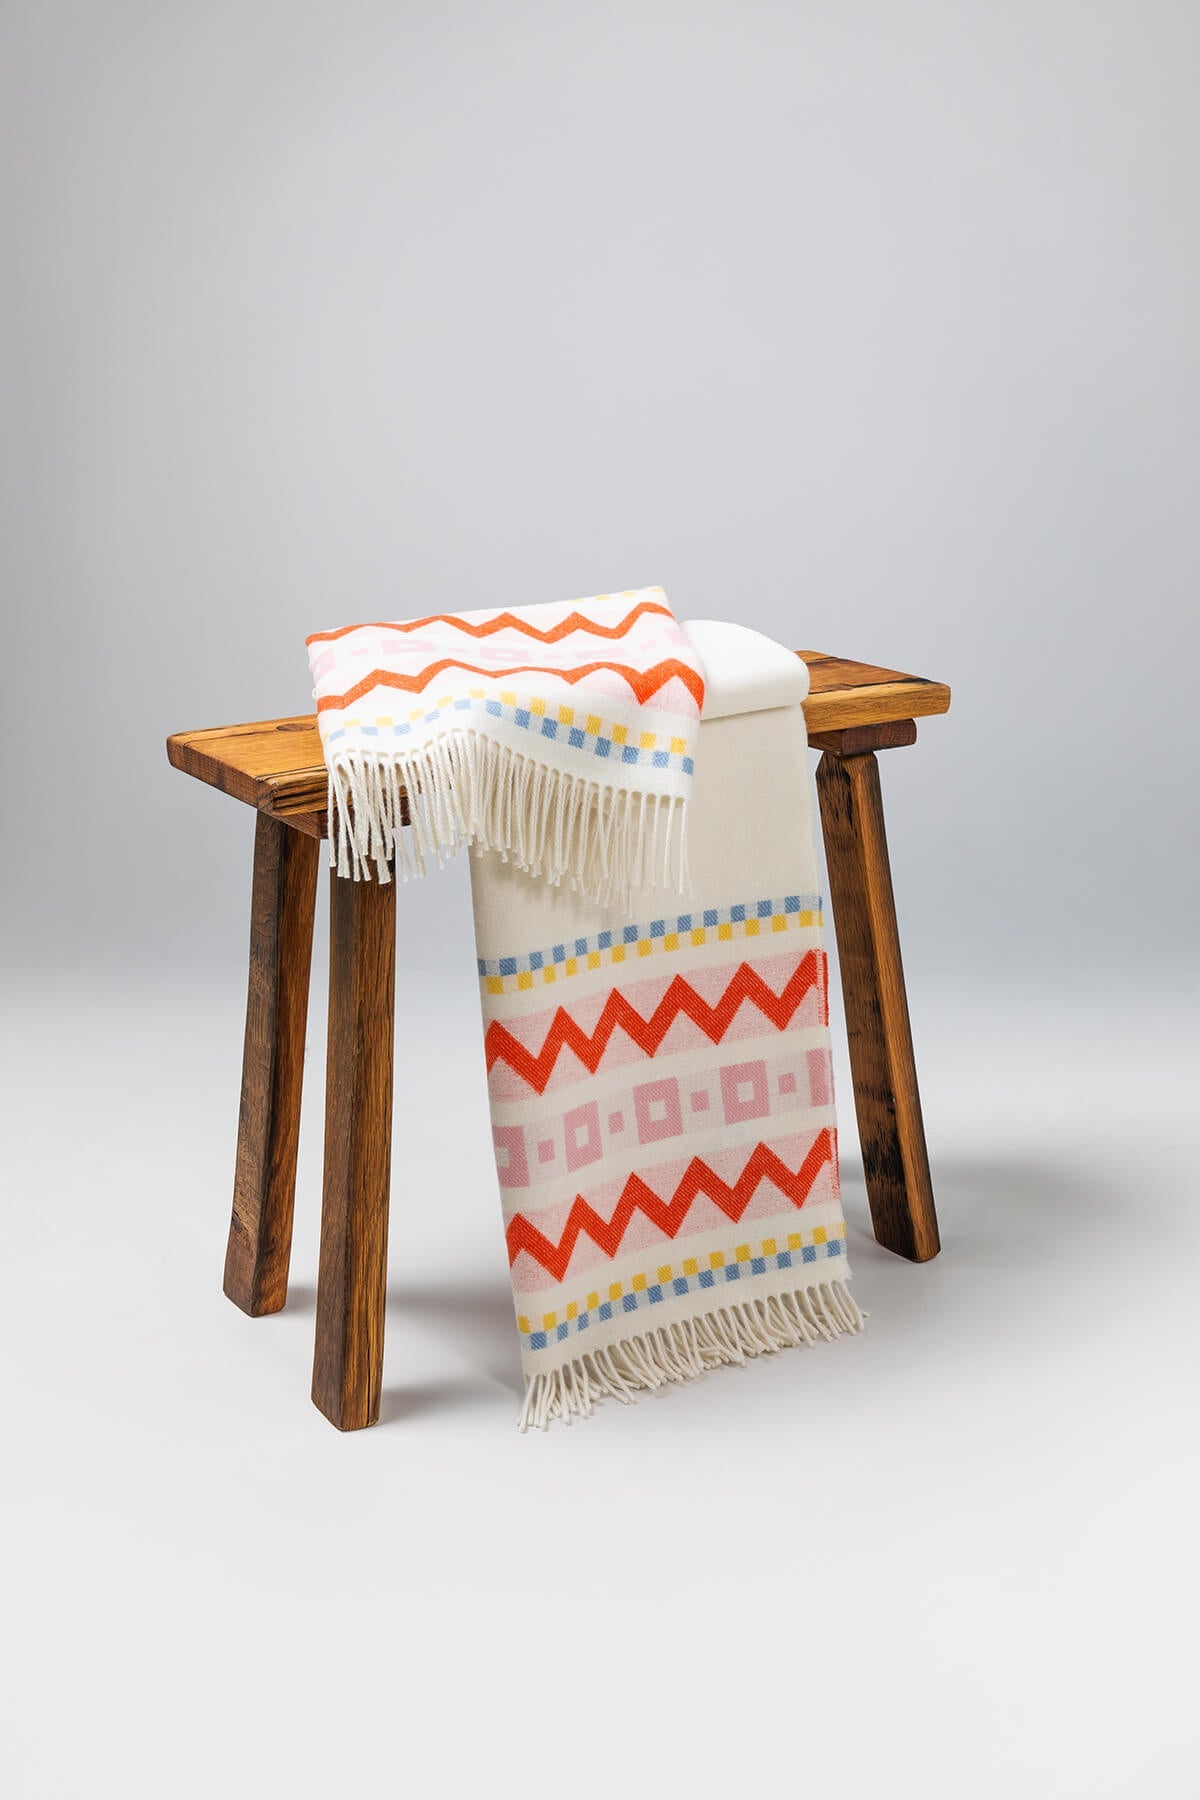 Draped over a small wooden stool a Johnstons of Elgin Children's Zig Zag Blanket in shades of pink, orange, and cream on a soft grey background. WB002334RU7277ONE